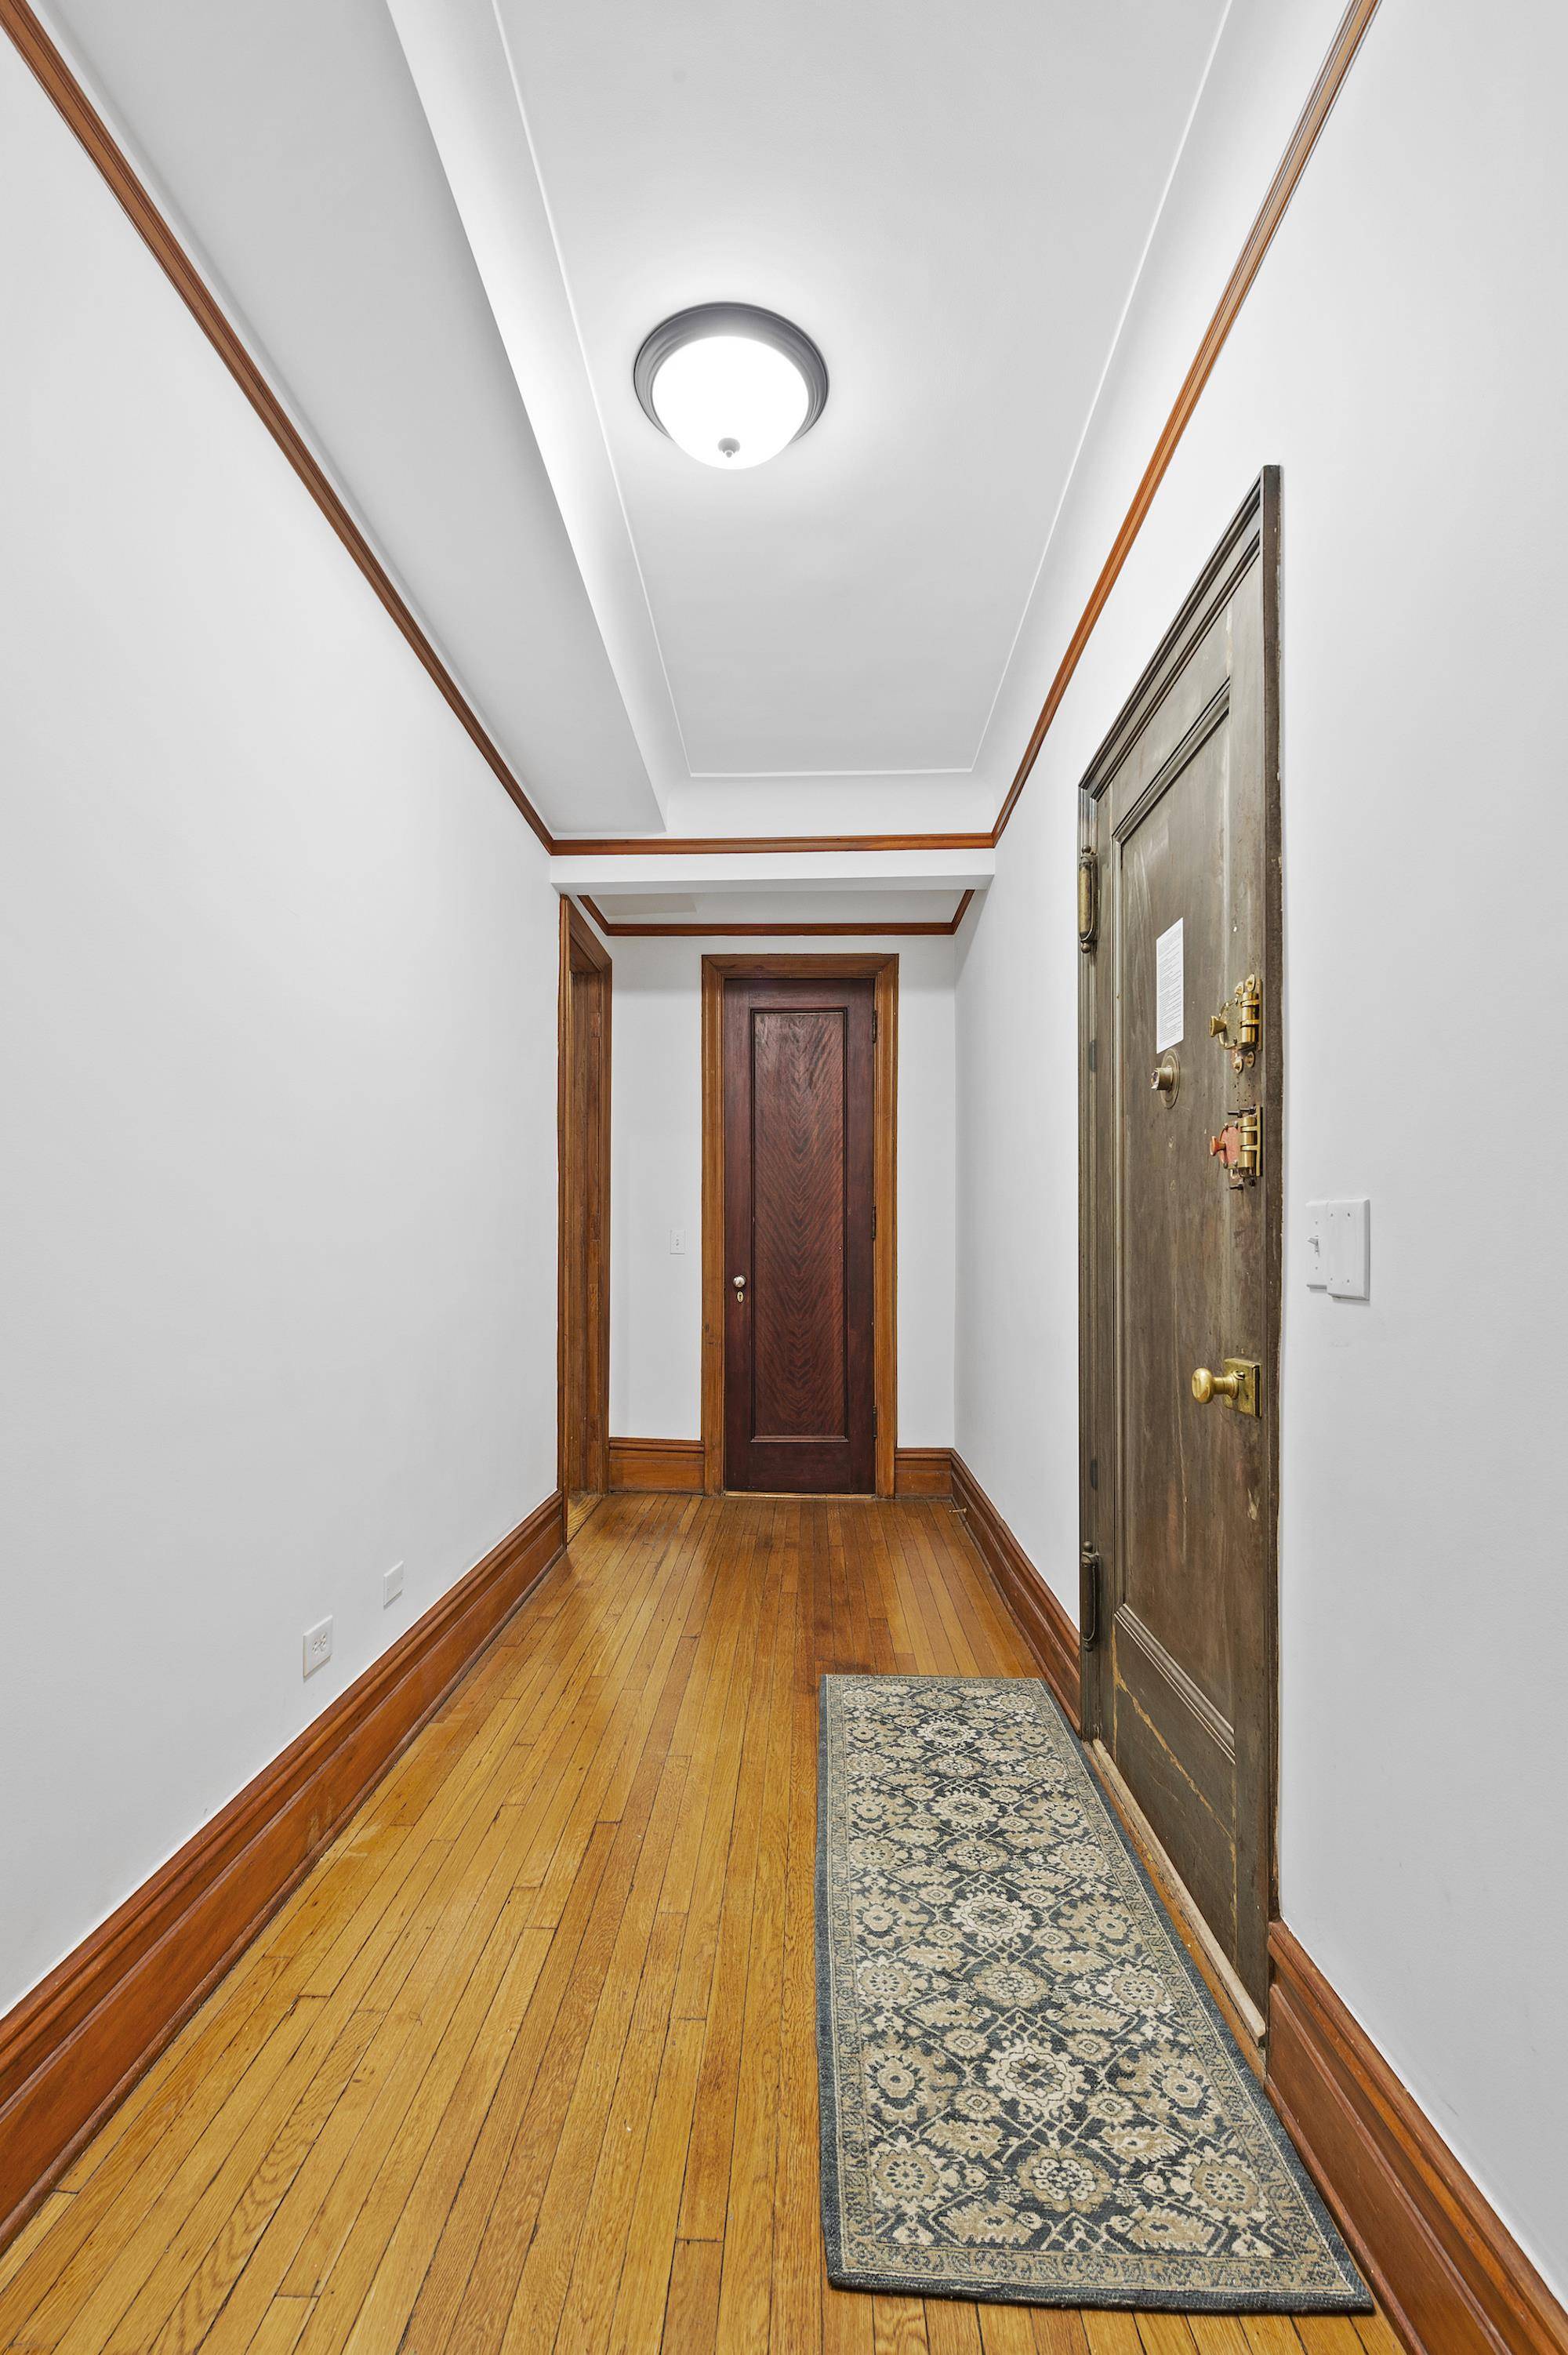 Need More Space and Tranquility, Come Home To This 1, 000 Sq Ft Renovated 1Bd, 1Bth Located in Historic Audubon Terrace Across The Street From Gorgeous Riverside Park and Hudson ...